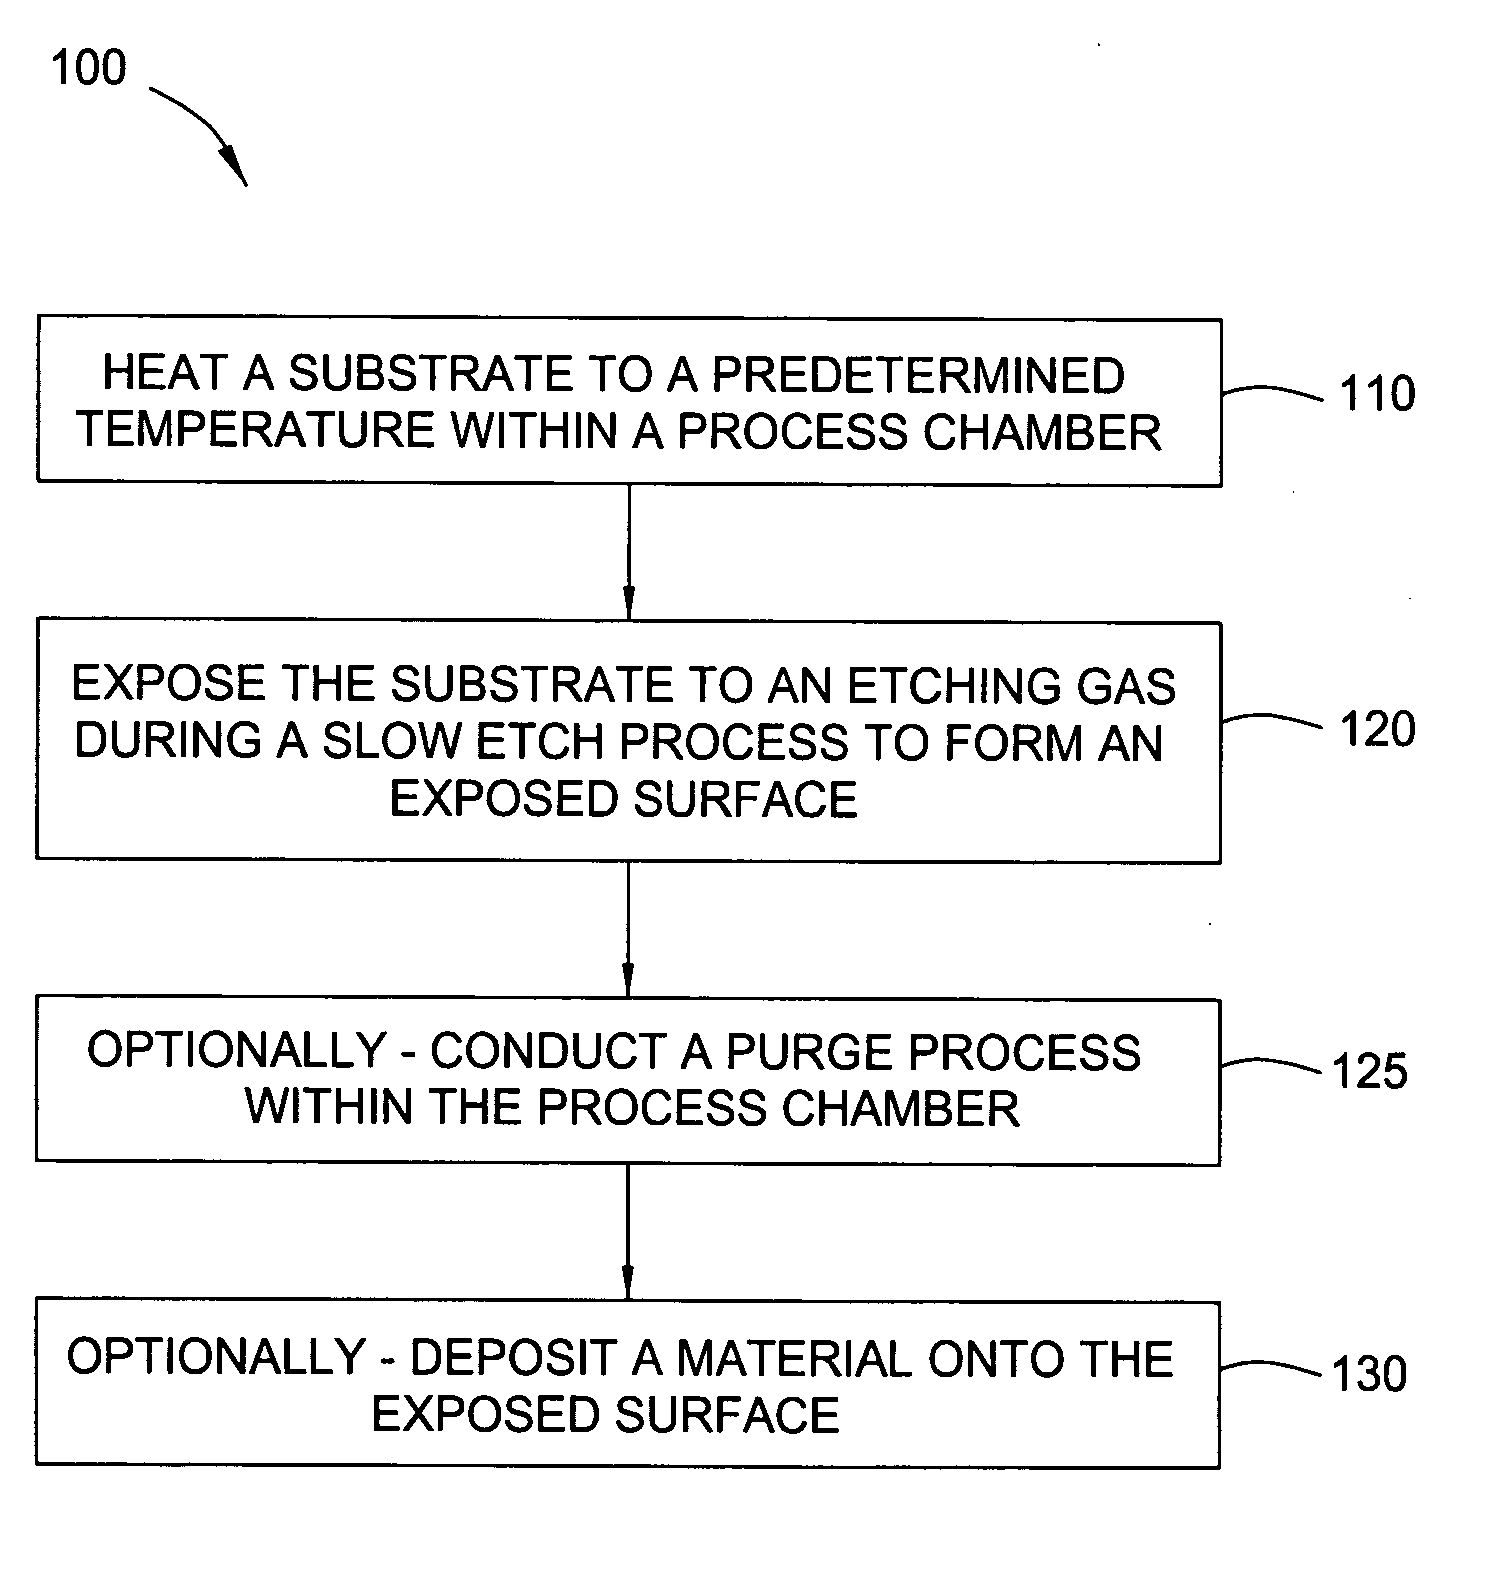 Etchant treatment processes for substrate surfaces and chamber surfaces